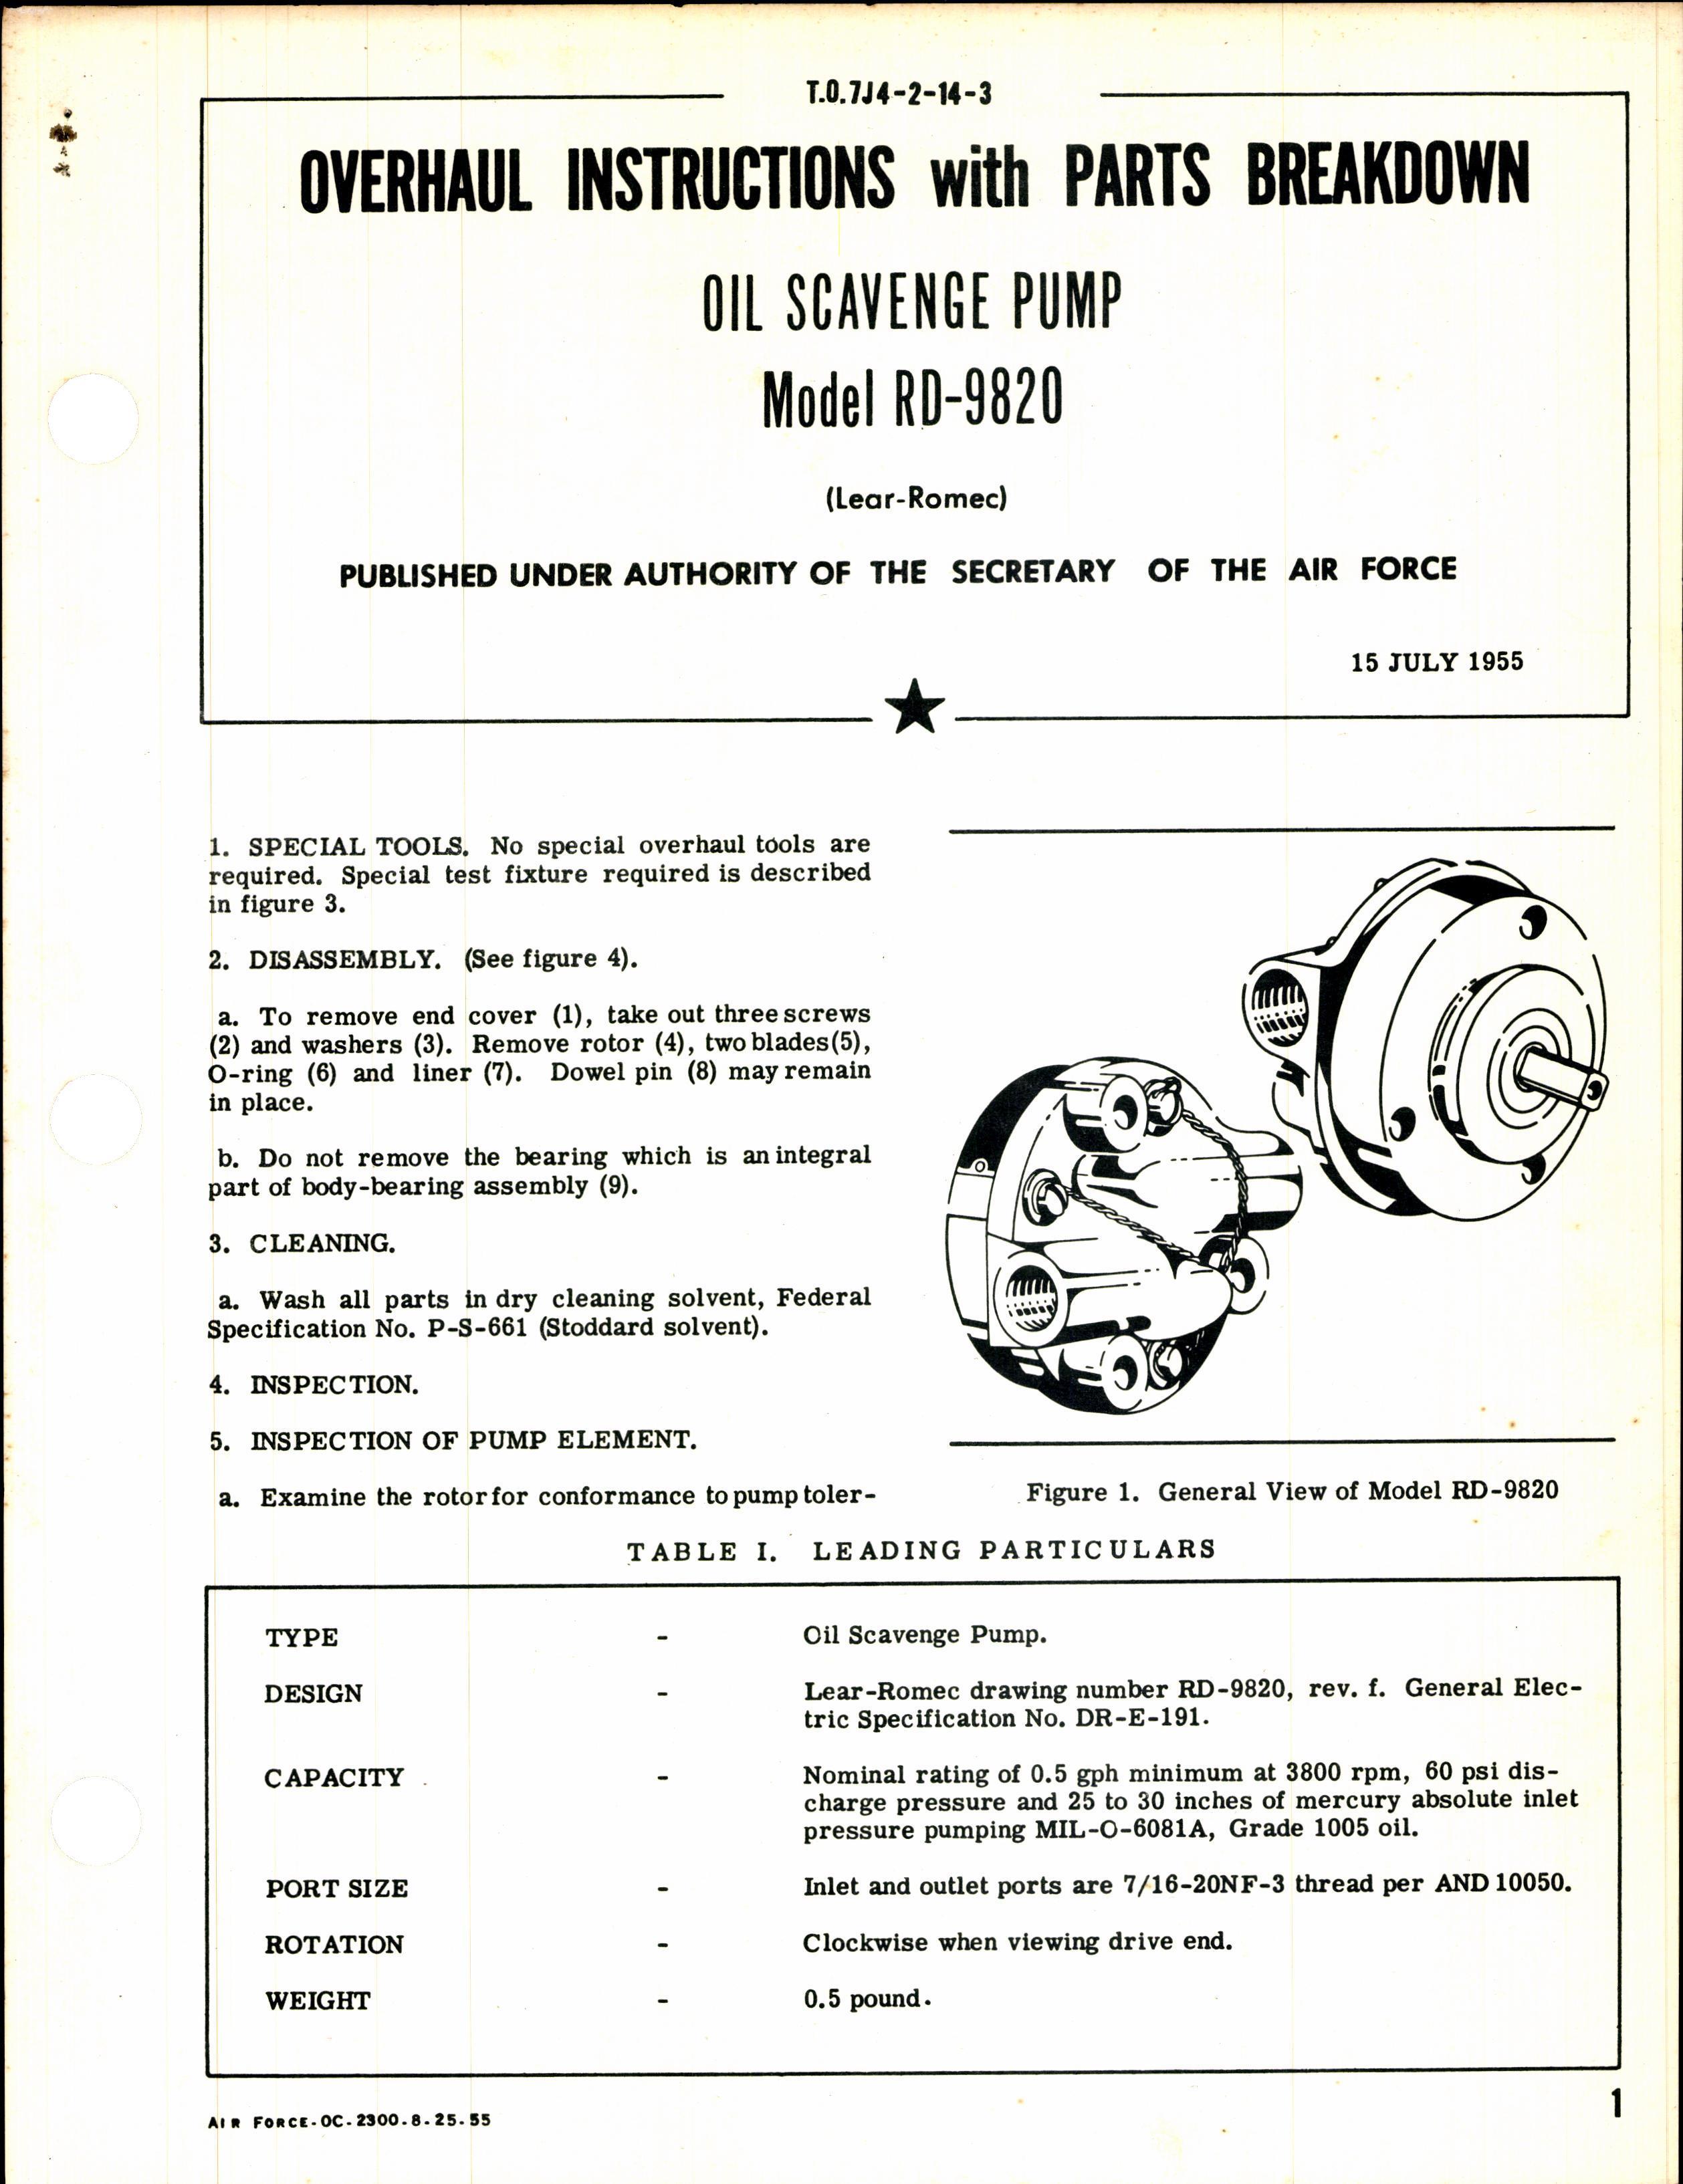 Sample page 1 from AirCorps Library document: Overhaul Instructions with Parts Breakdown for Oil Scavenge Pump Model RD-9820